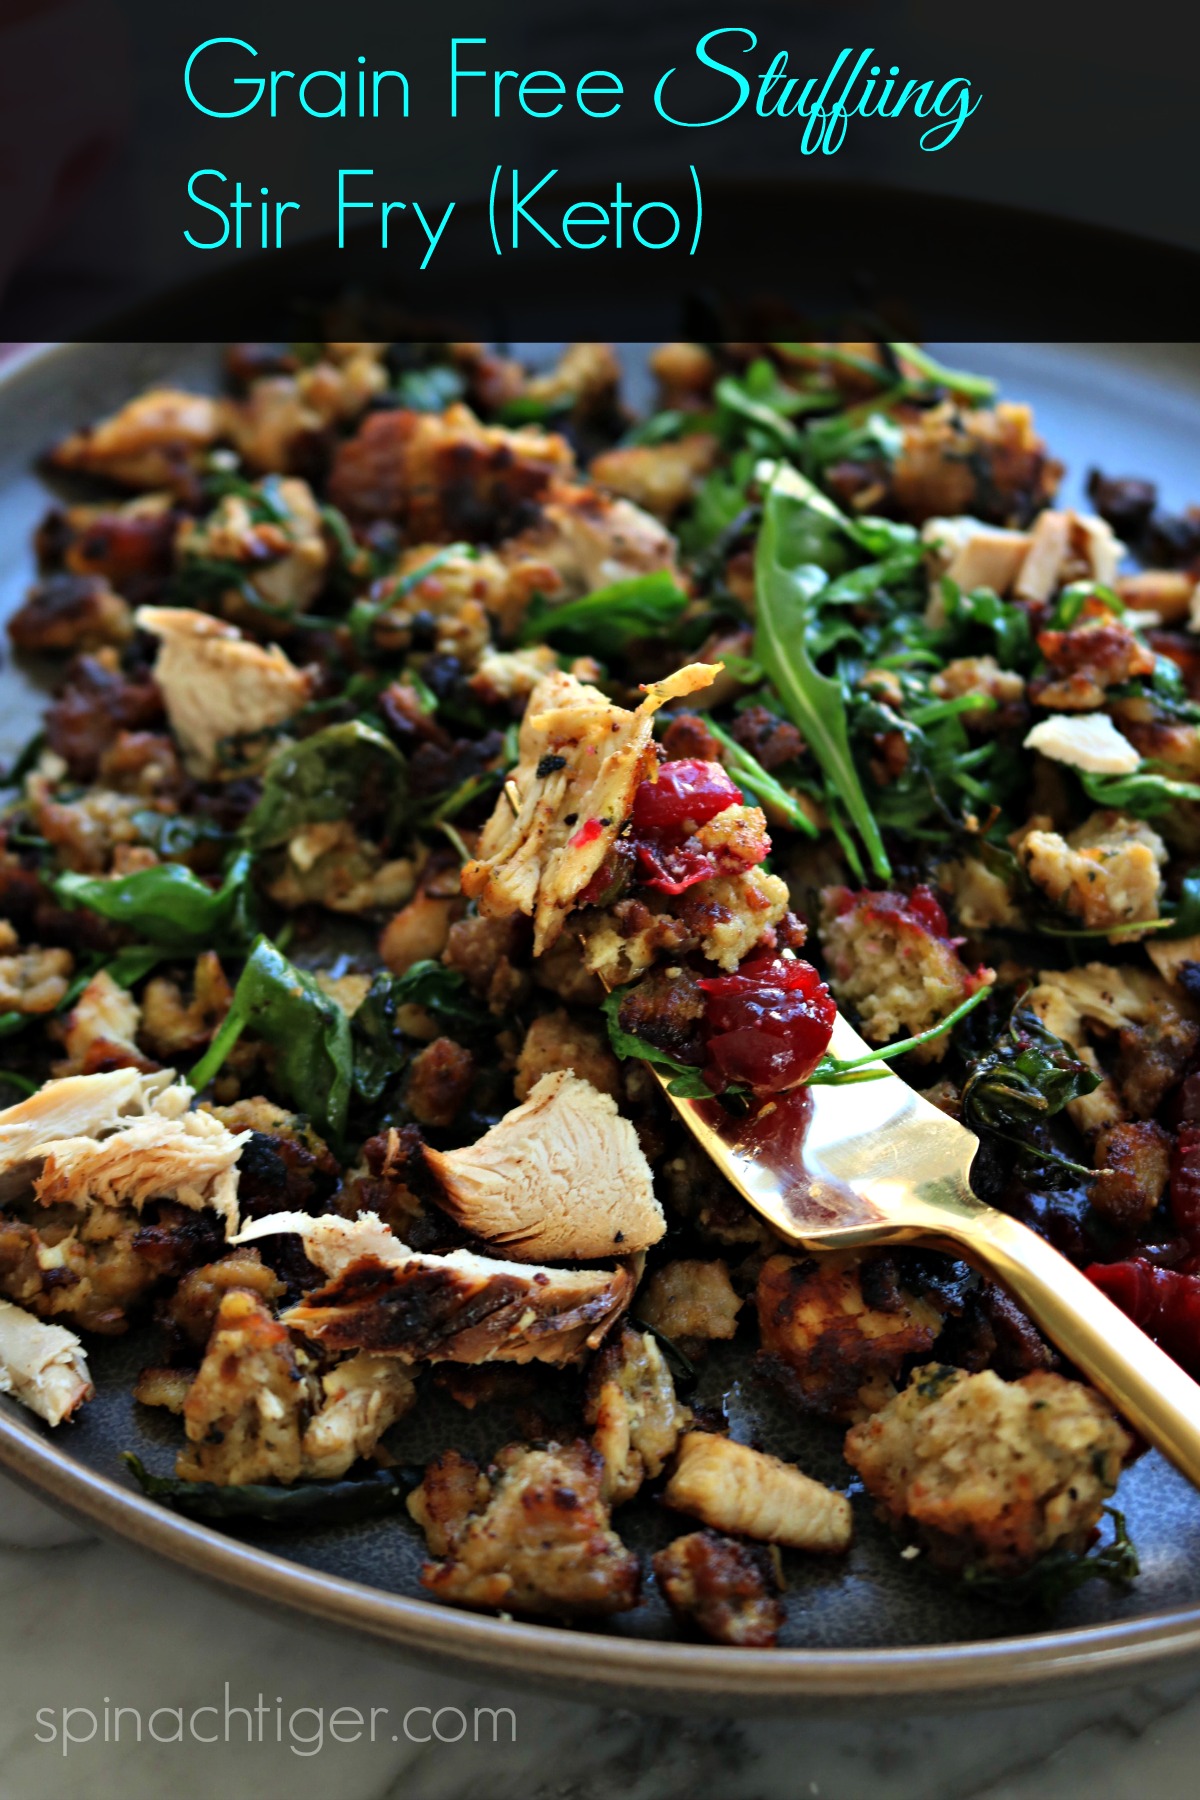 Grain Free stuffing with sugar free cranberry sauce from Spinach Tiger